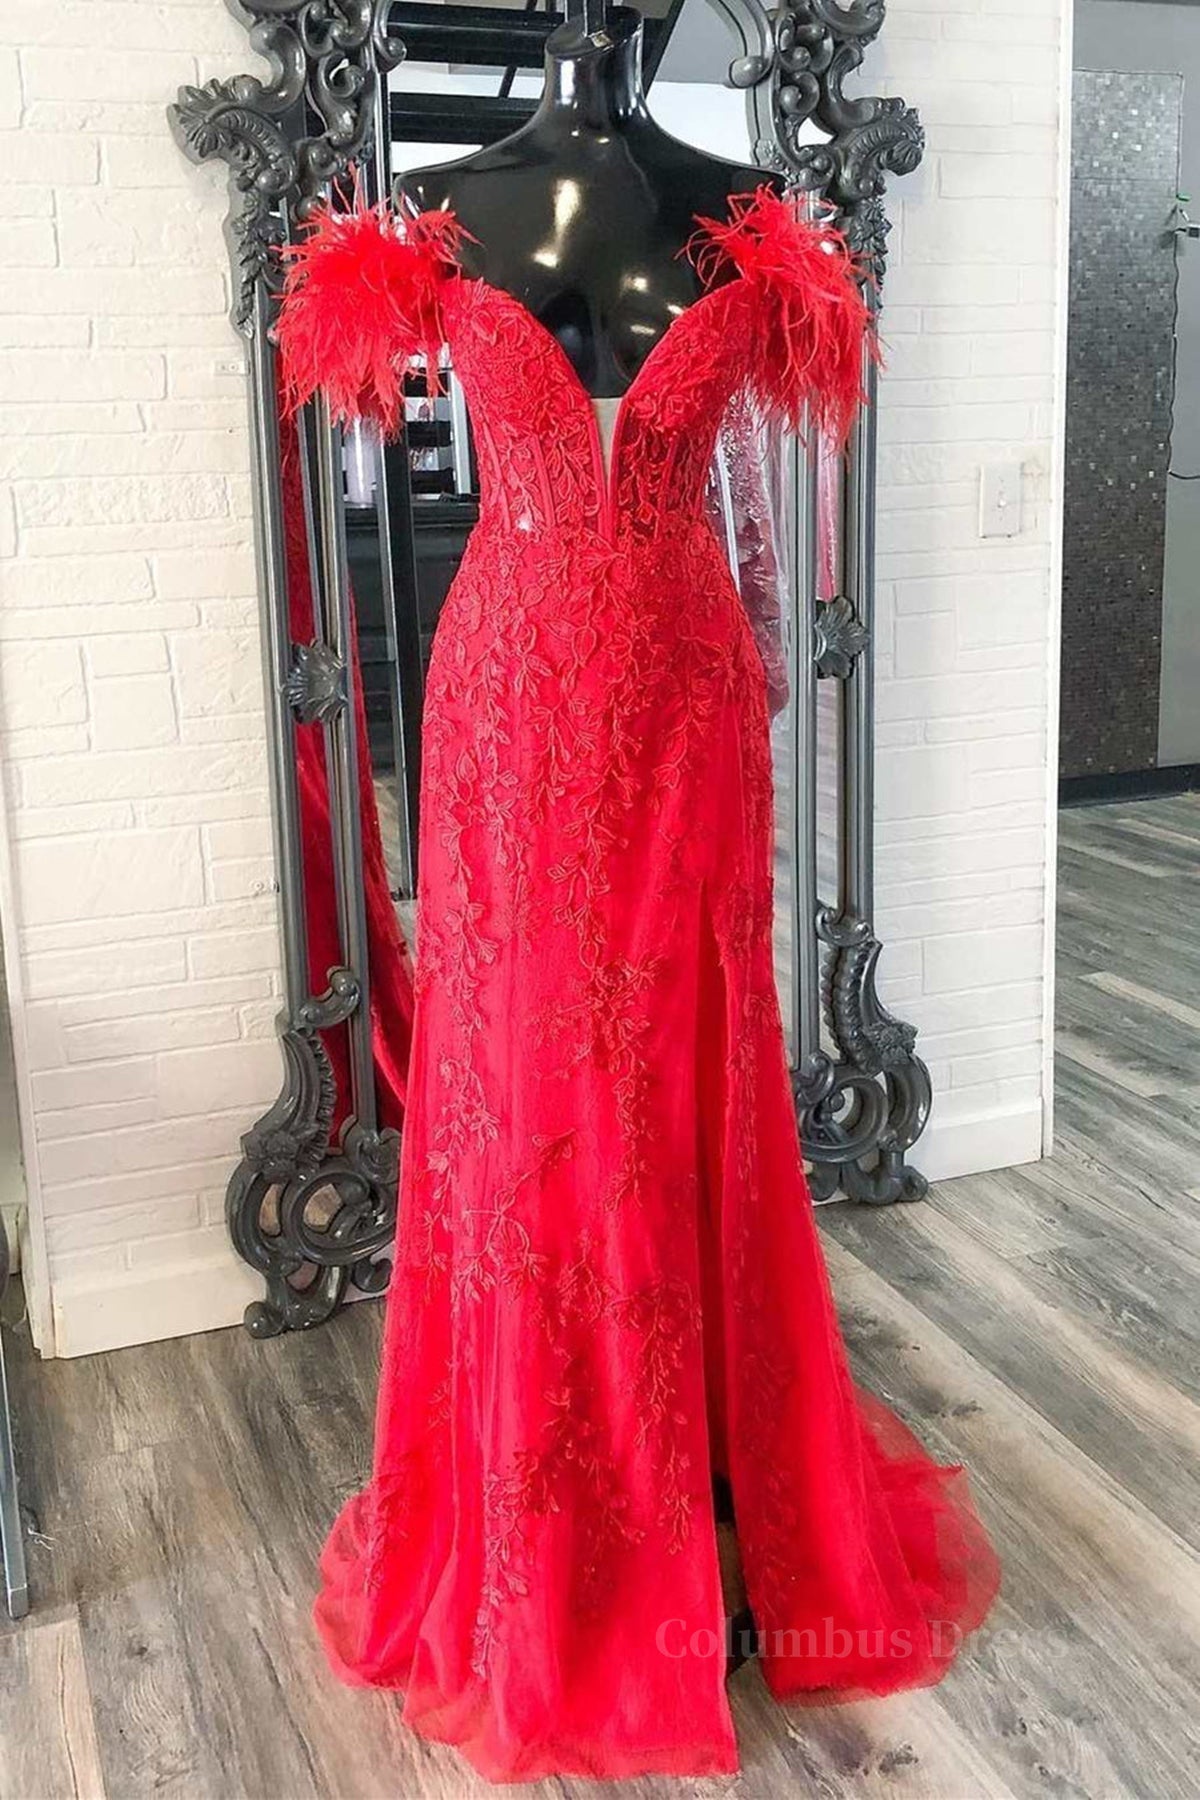 Off Shoulder V Neck Mermaid Red Lace Long Corset Prom Dress with High Slit, Mermaid Red Corset Formal Dress, Red Lace Evening Dress outfit, Bridesmaid Dresses Sleeveless